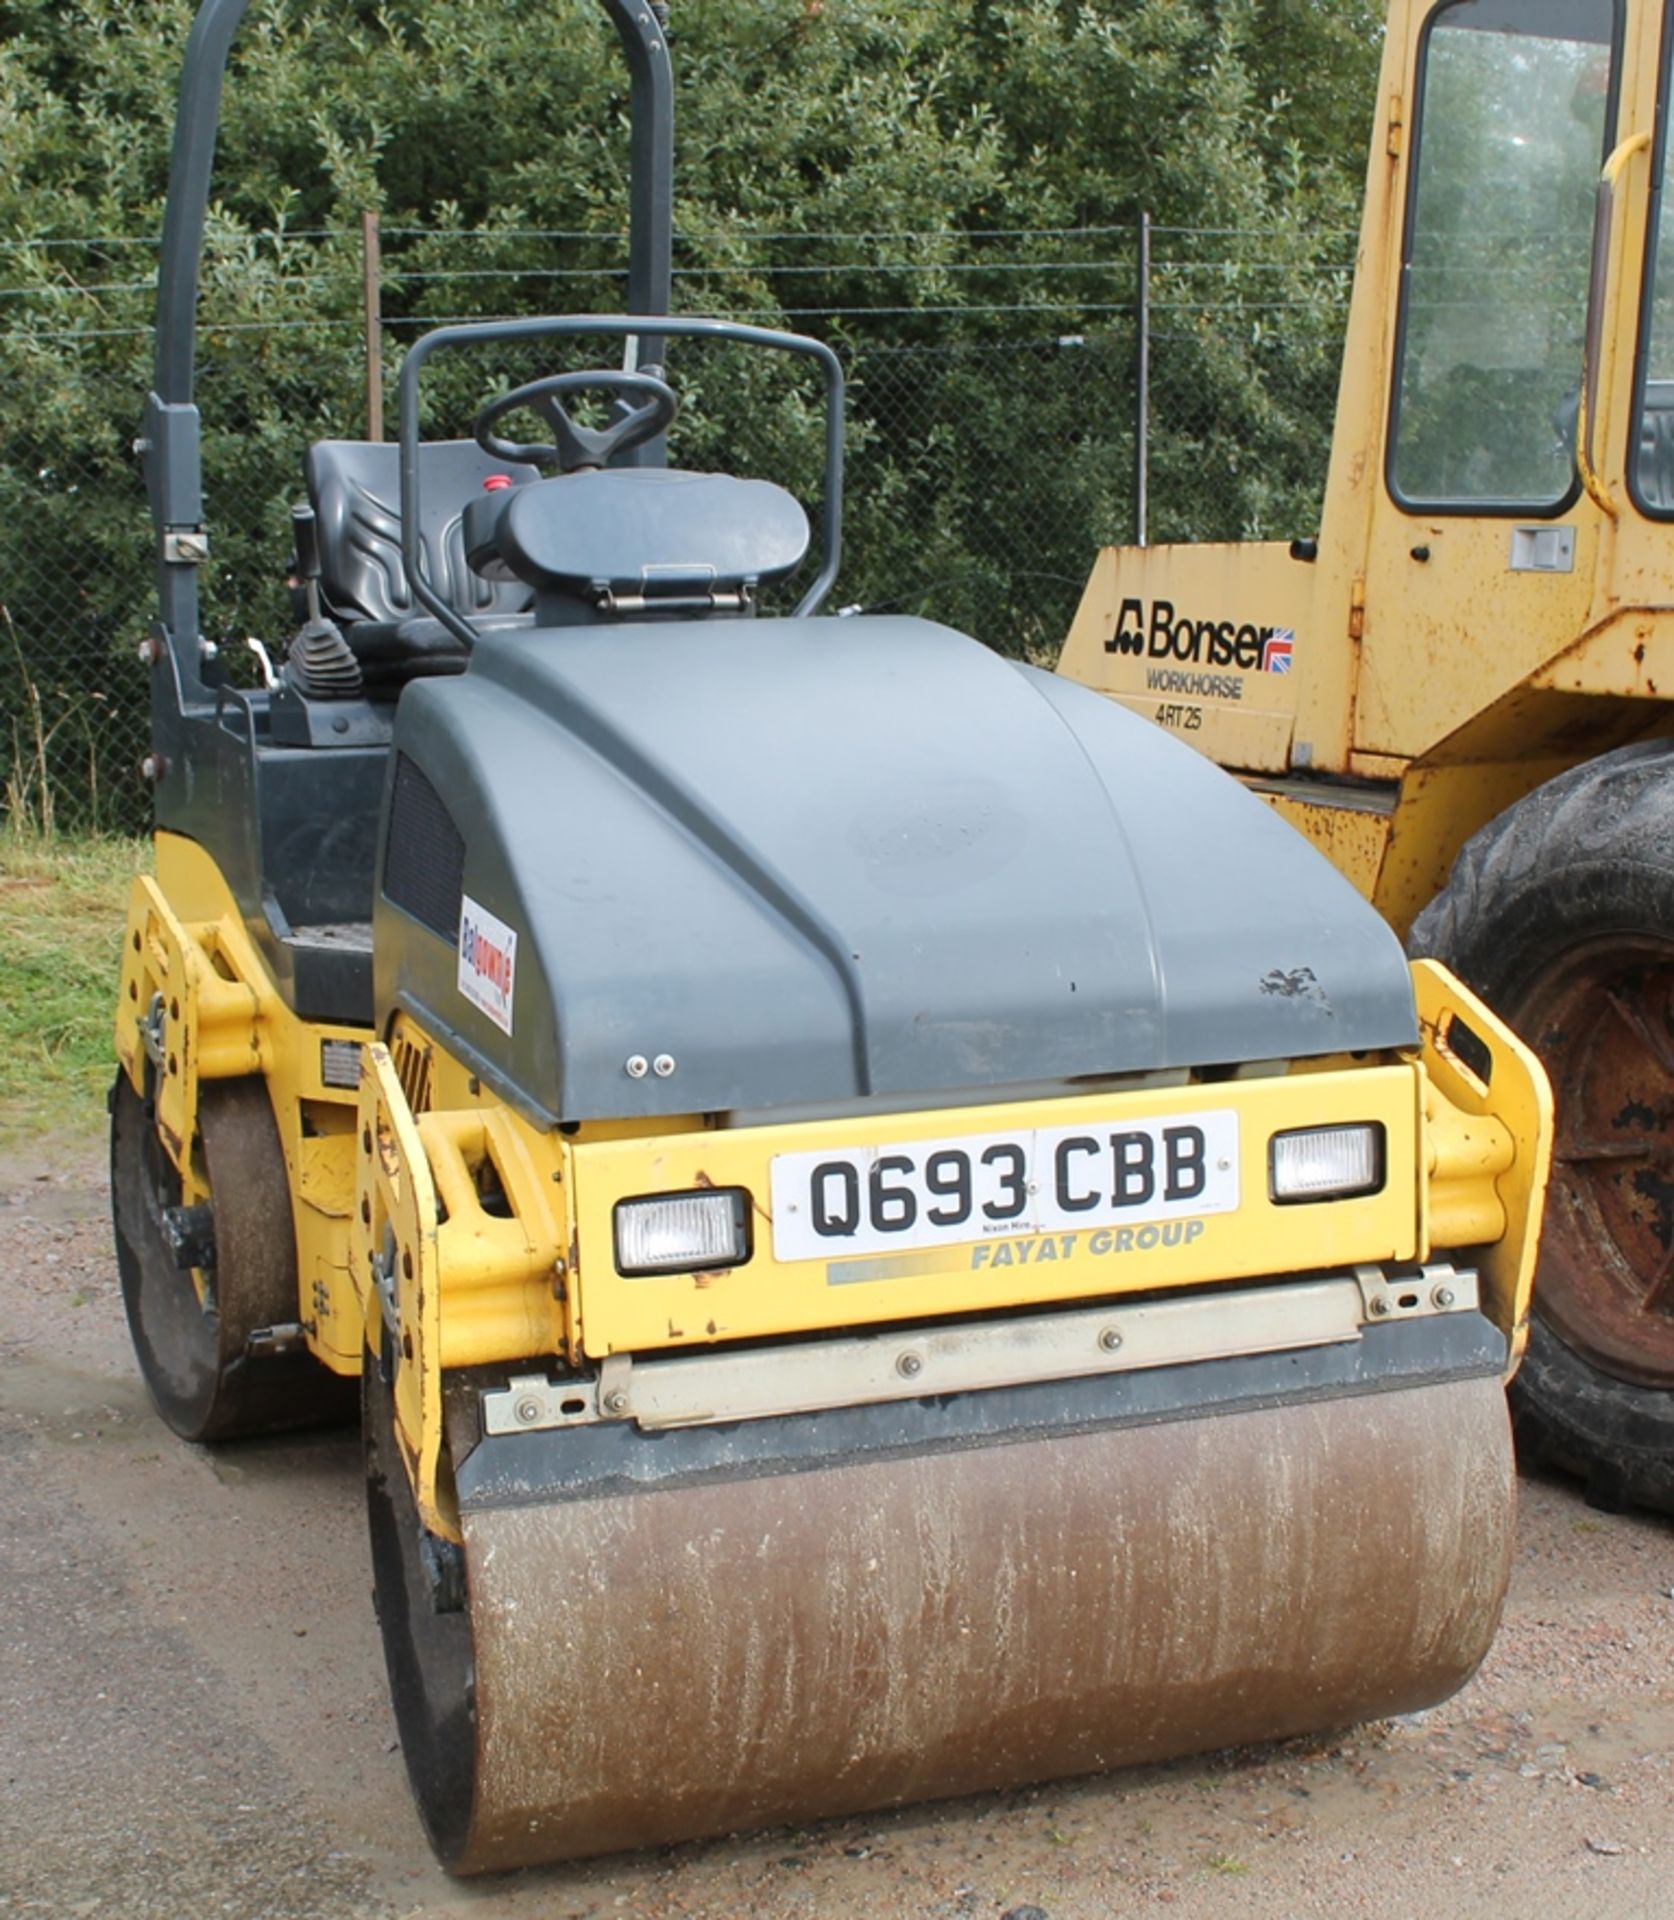 Bomag Bw120 Ad-4 Unknown - 1647cc Tractor - Image 4 of 4